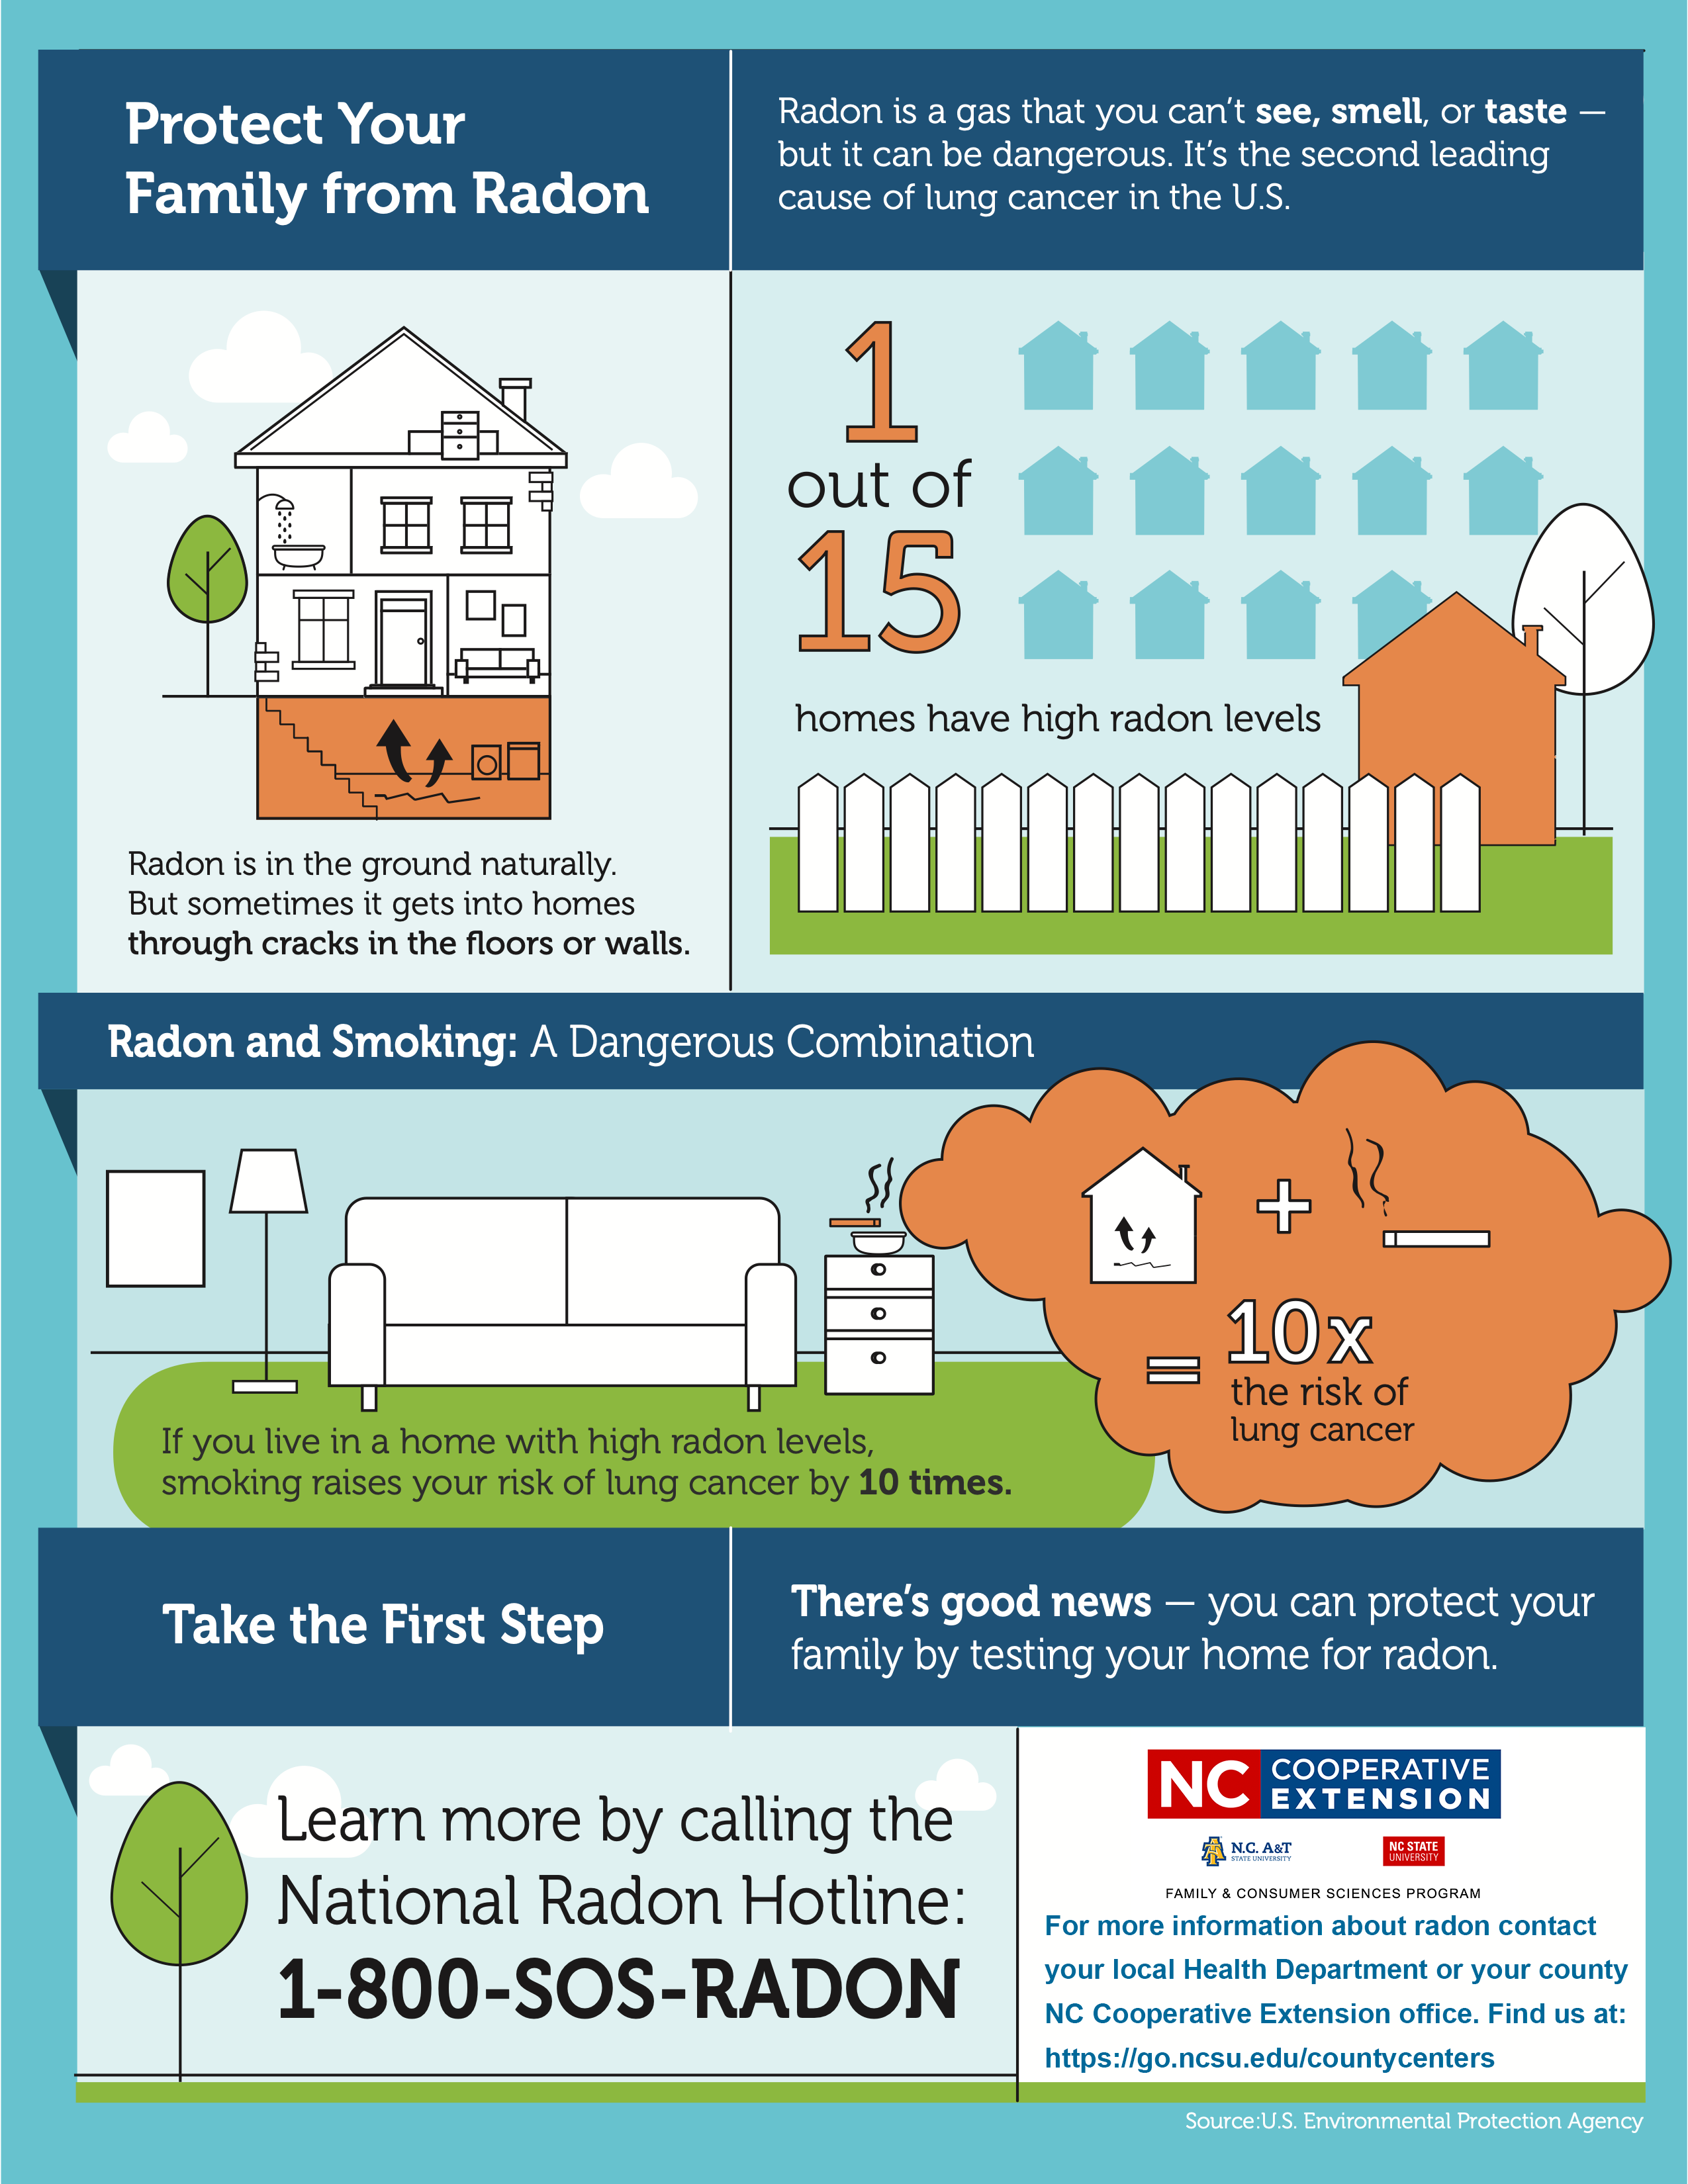 Radon: Your Home and Your Health | N.C. Cooperative Extension